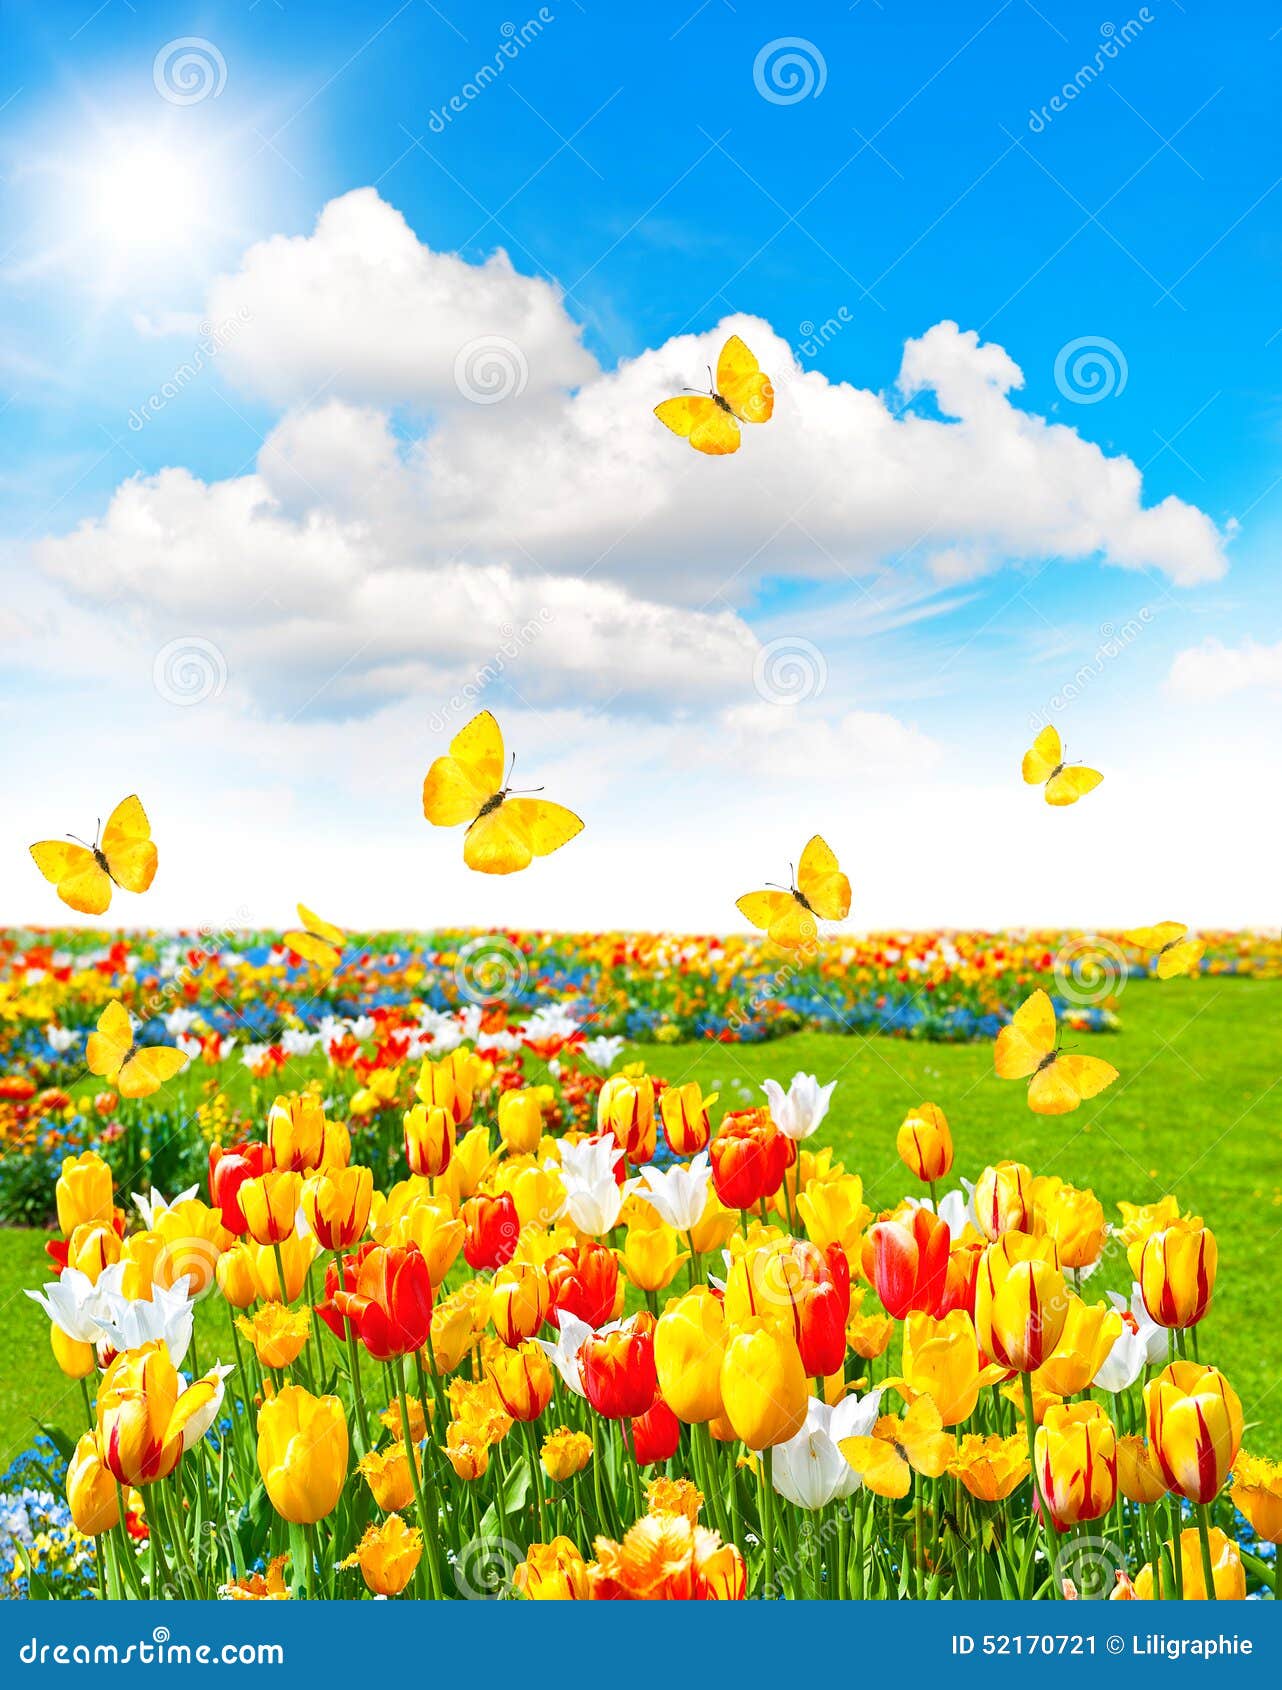 spring-time-landscape-butterflies-sunny-